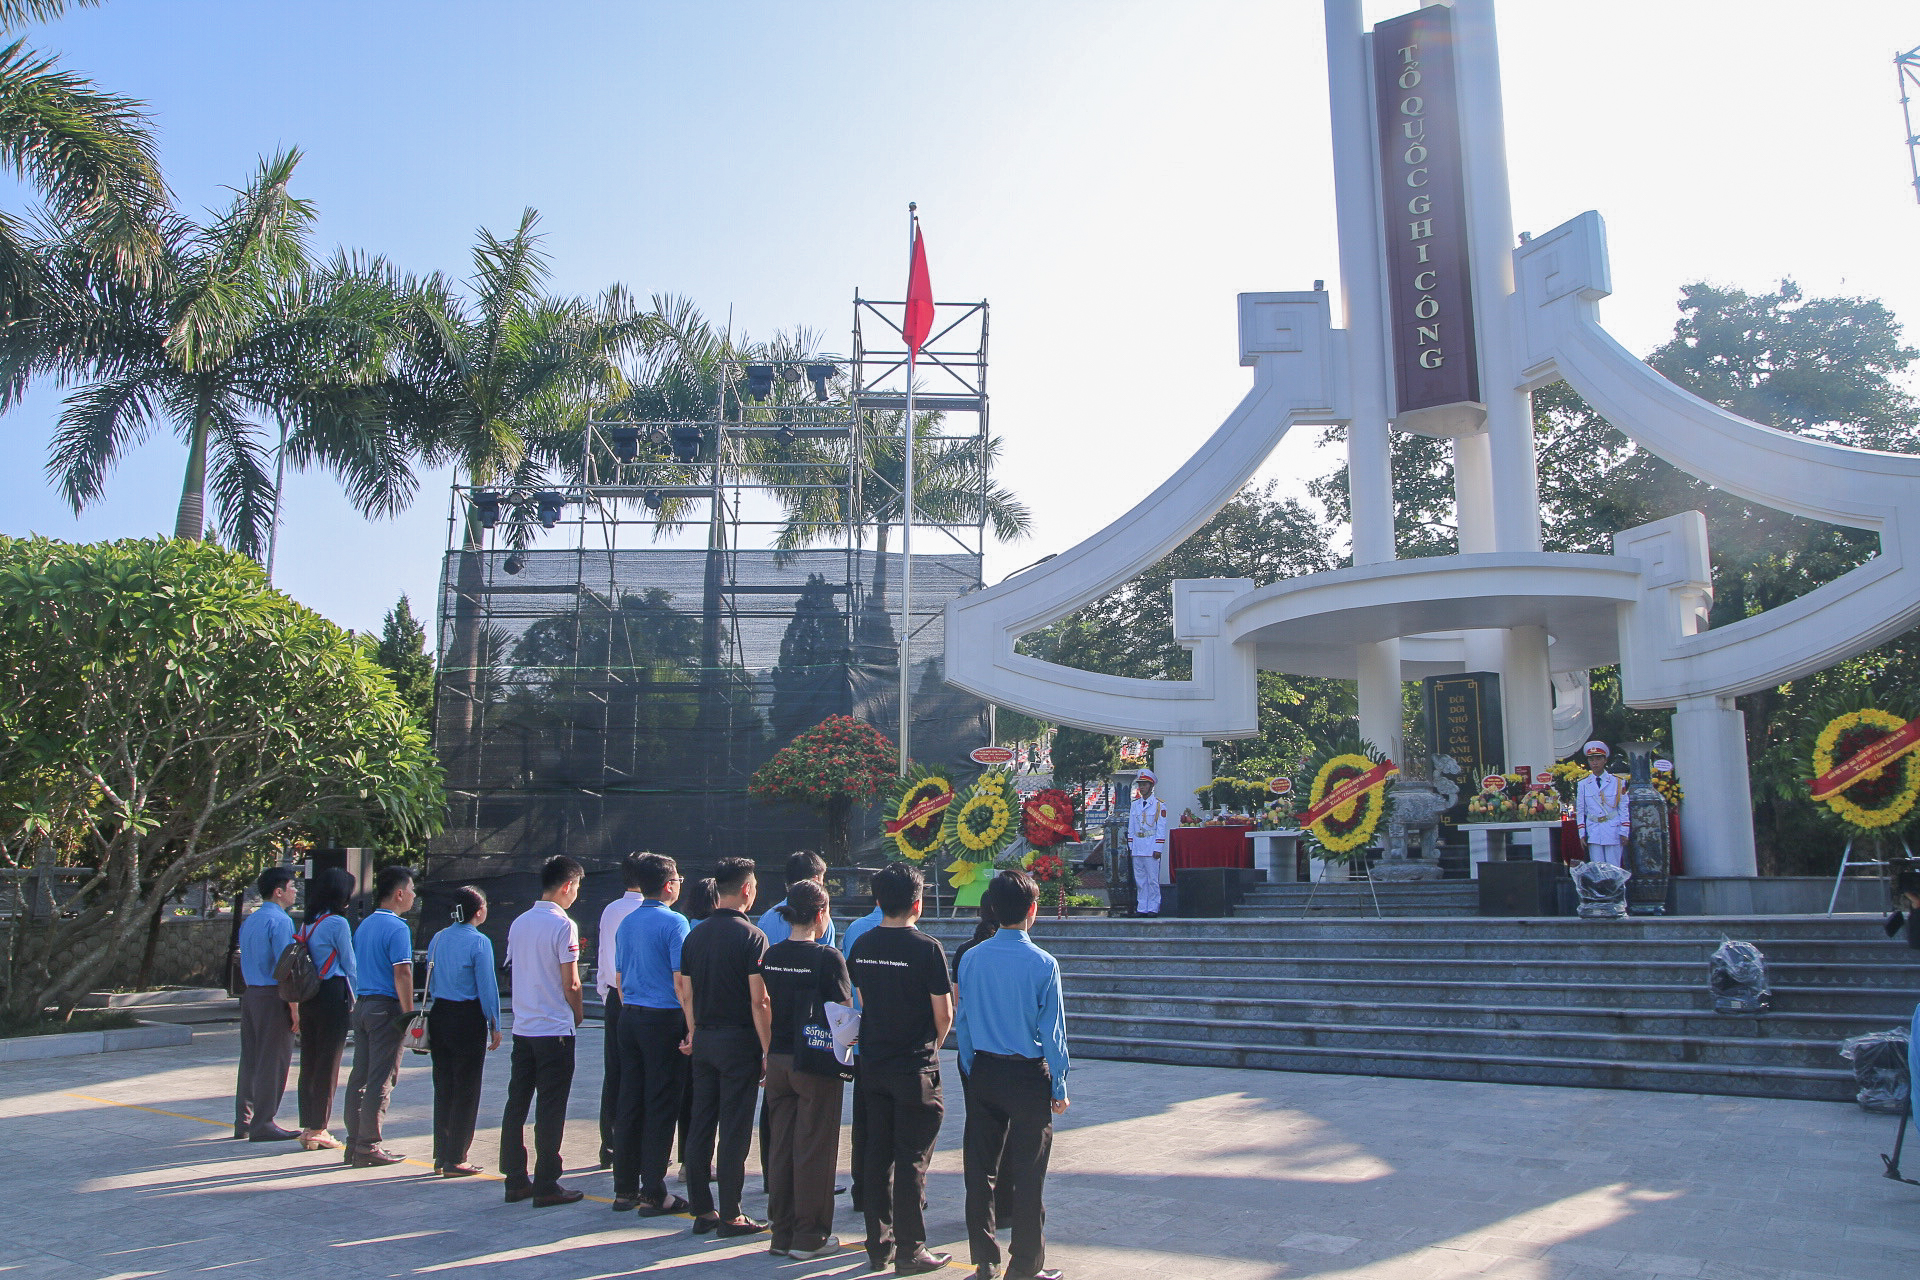 GIMO joins the Vietnam General Confederation of Labor in commemorating the 75th anniversary of the Invalids and Fallen Soldiers’ Day